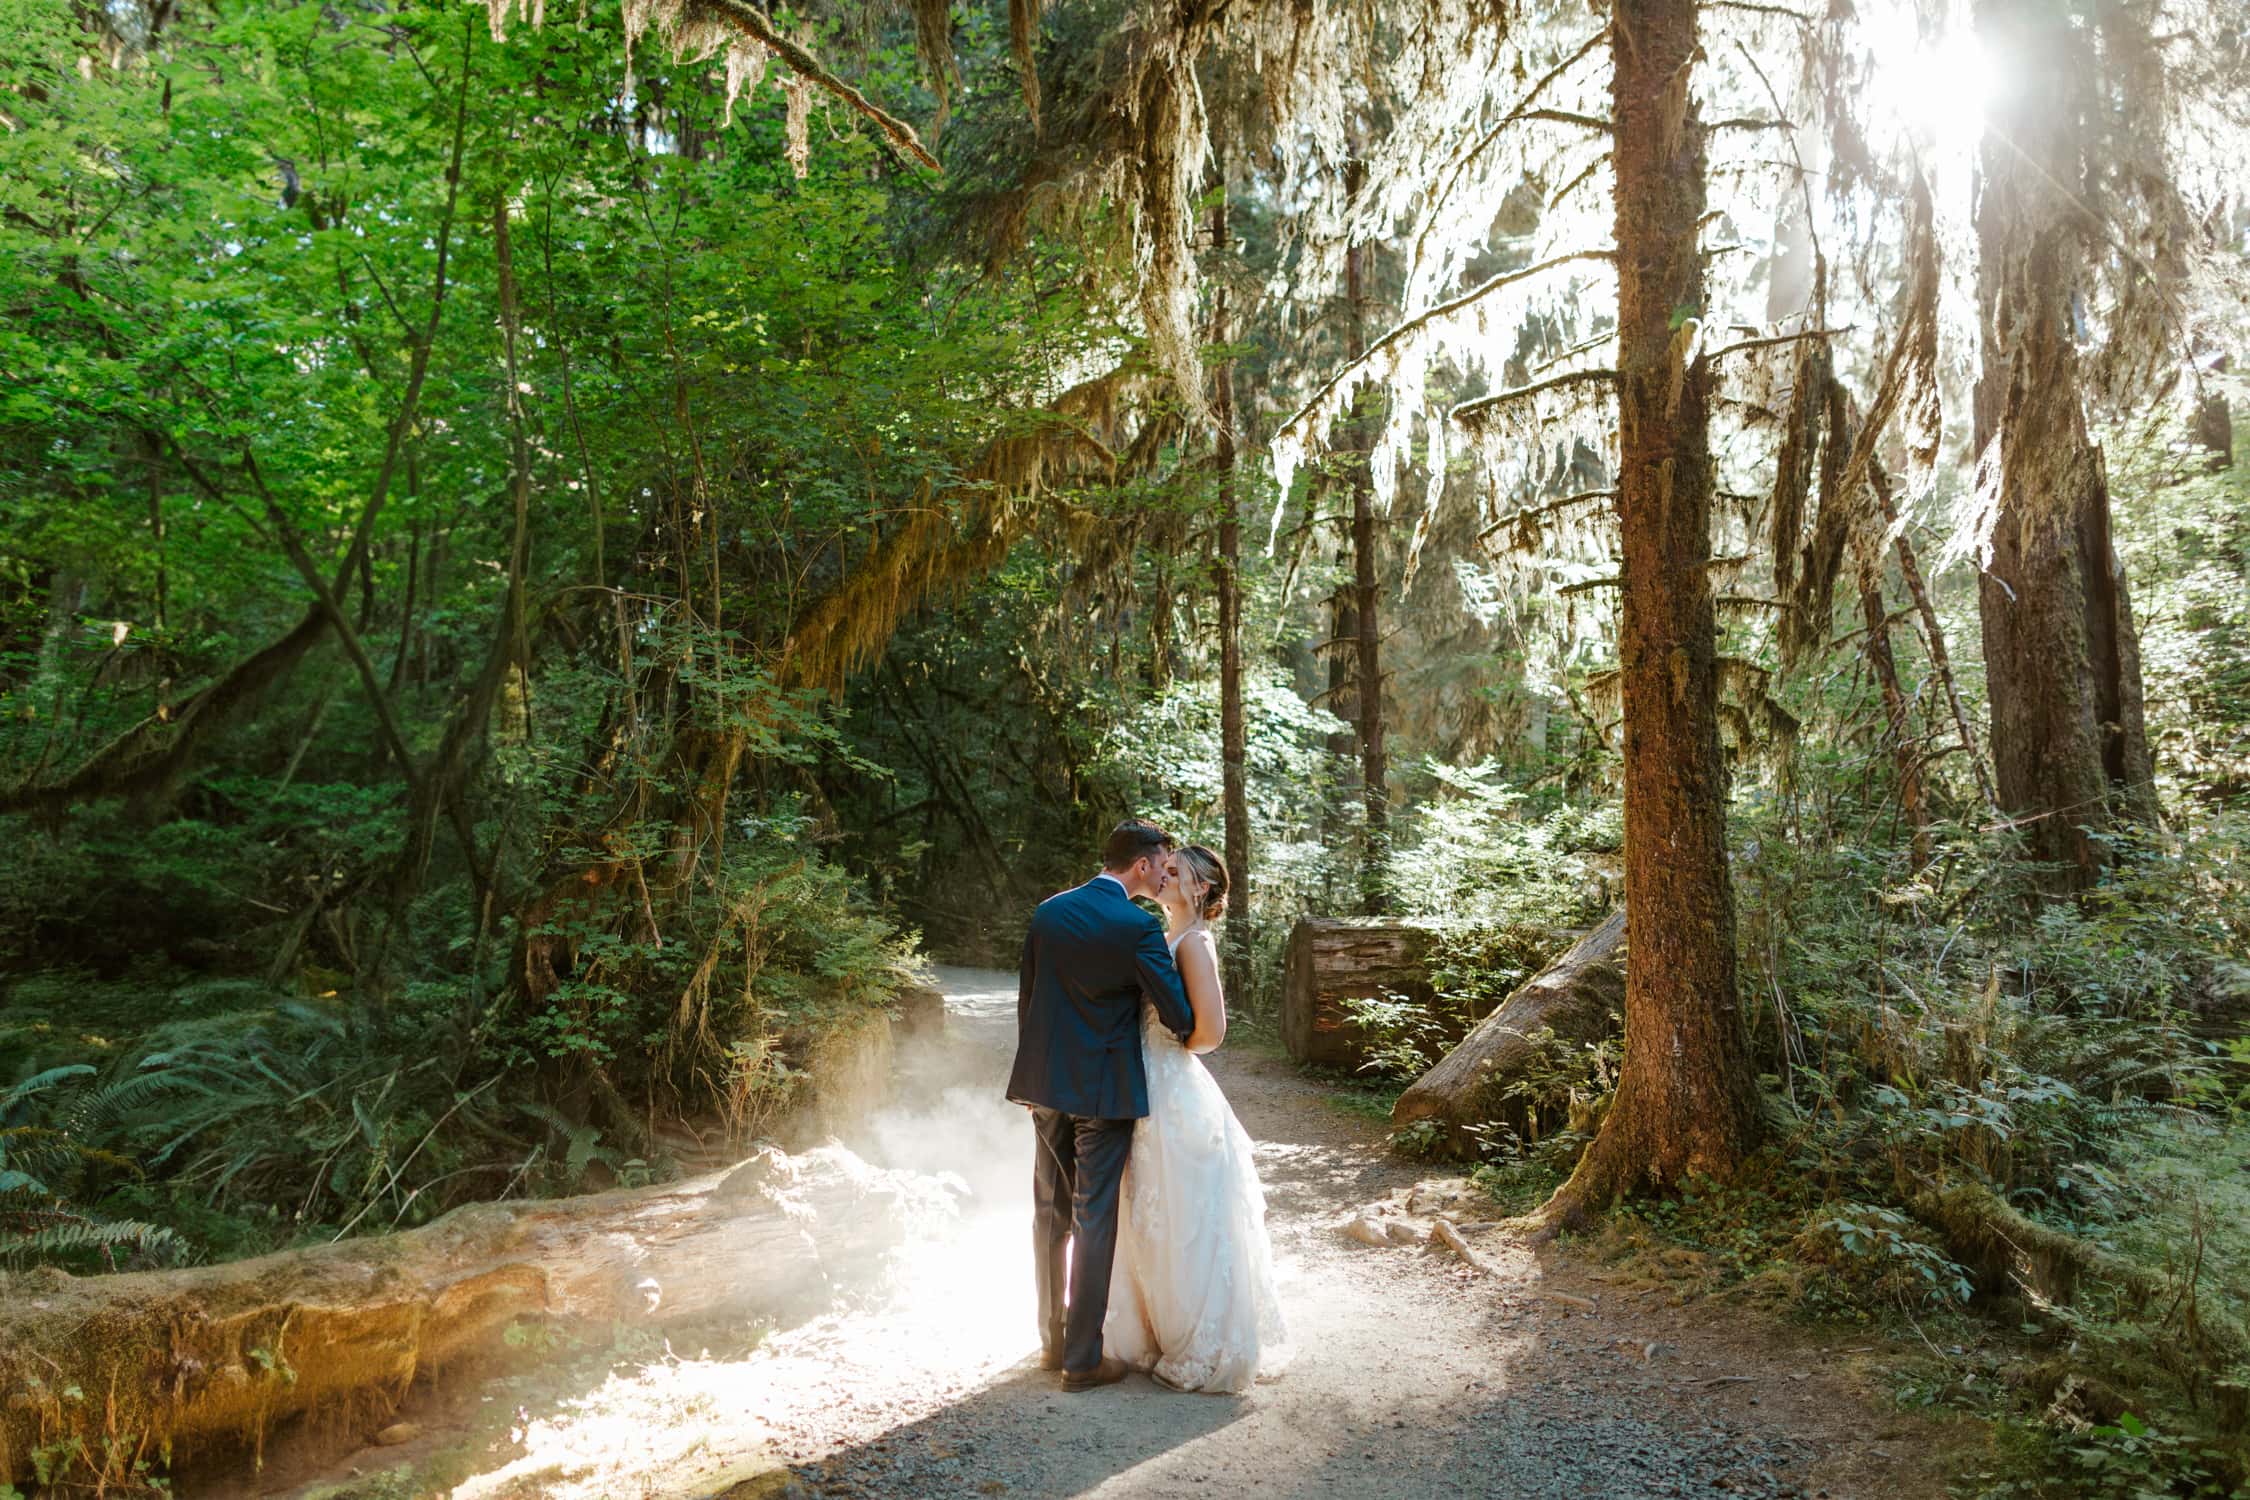 A couple in wedding attire kissing each other in the Hoh Rainforest.